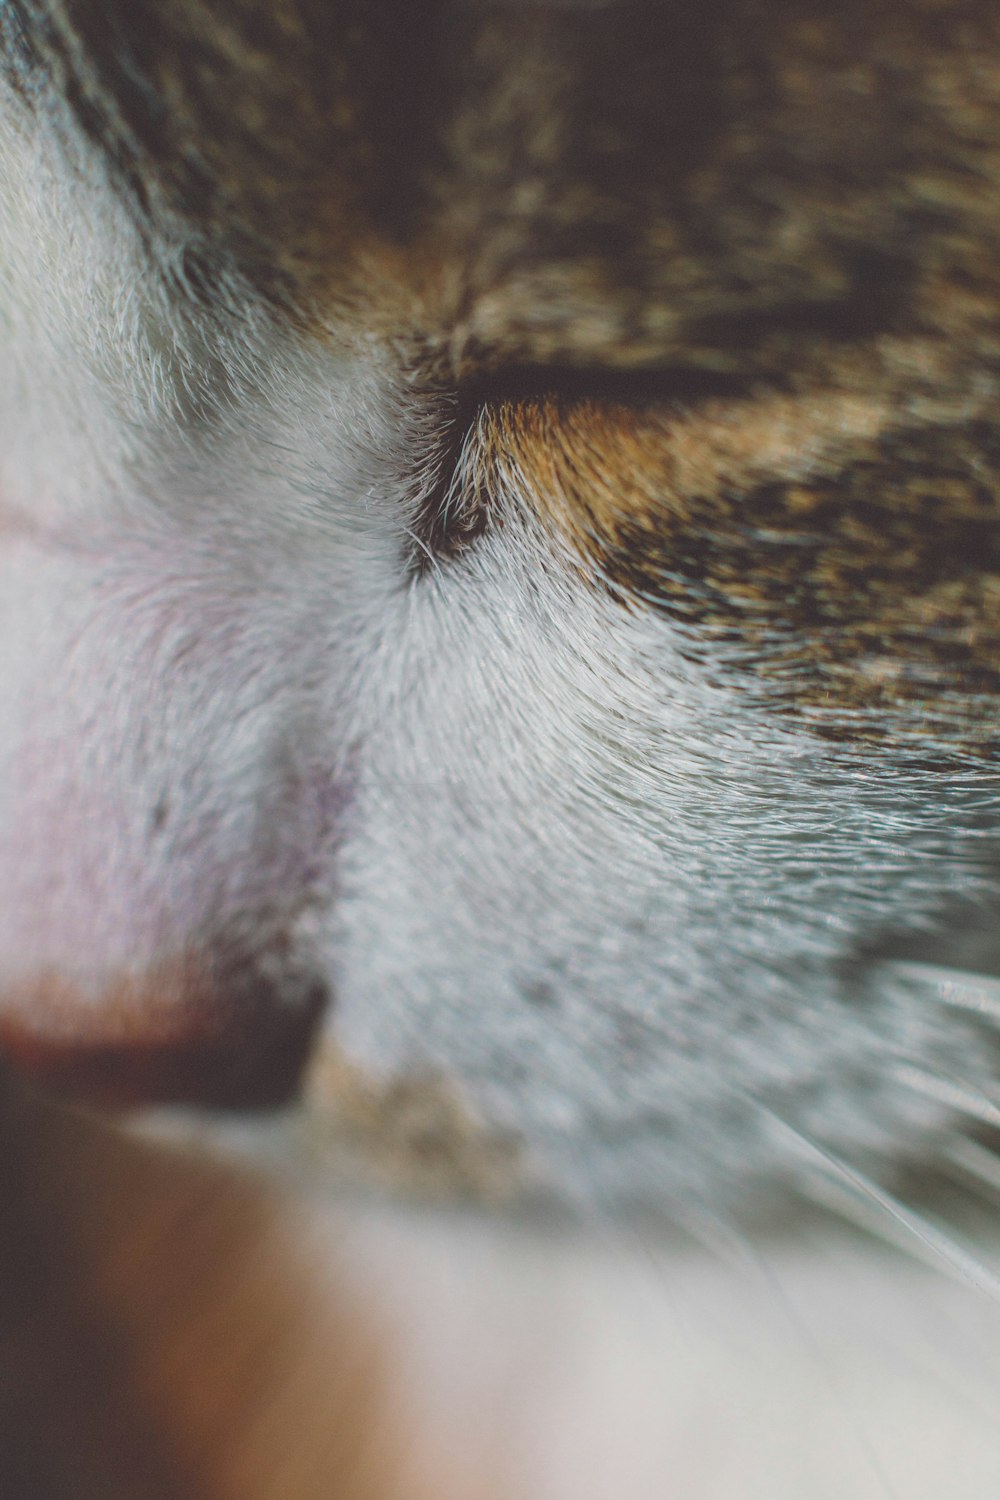 a close up of a cat's face with its eyes closed